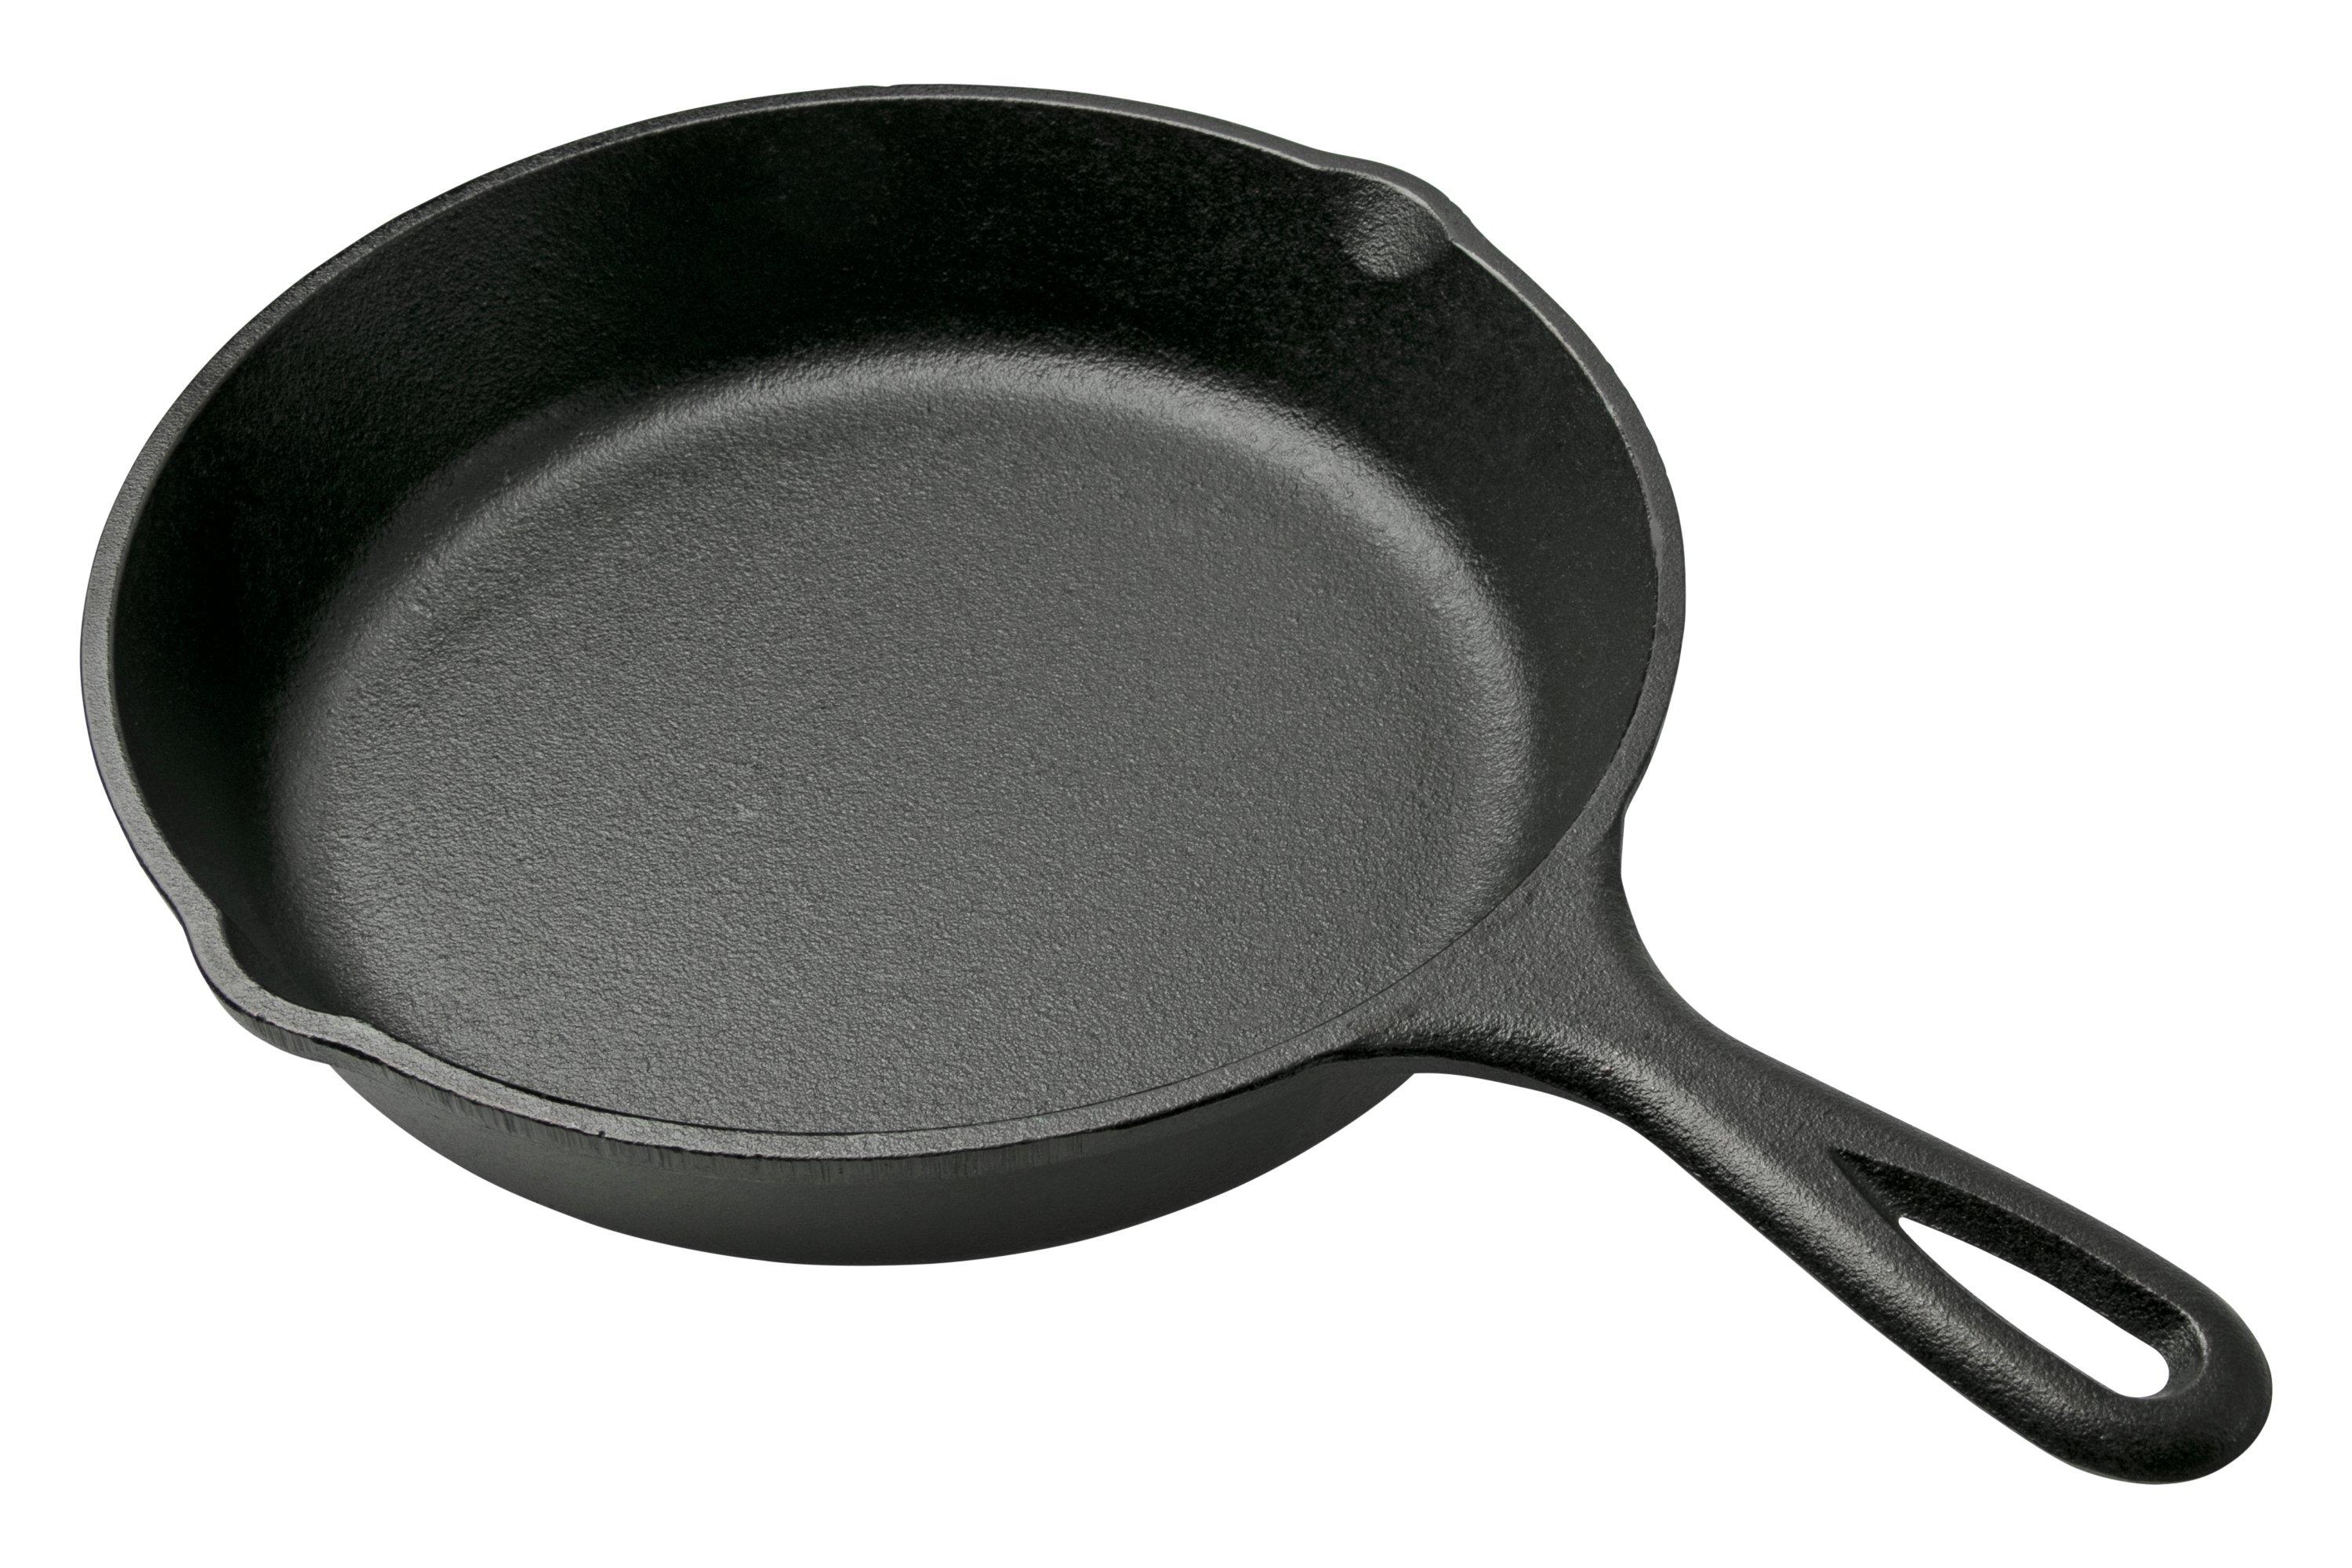 Lodge Classic Cast Iron Skillet L6SK3, 23 cm  Advantageously shopping at